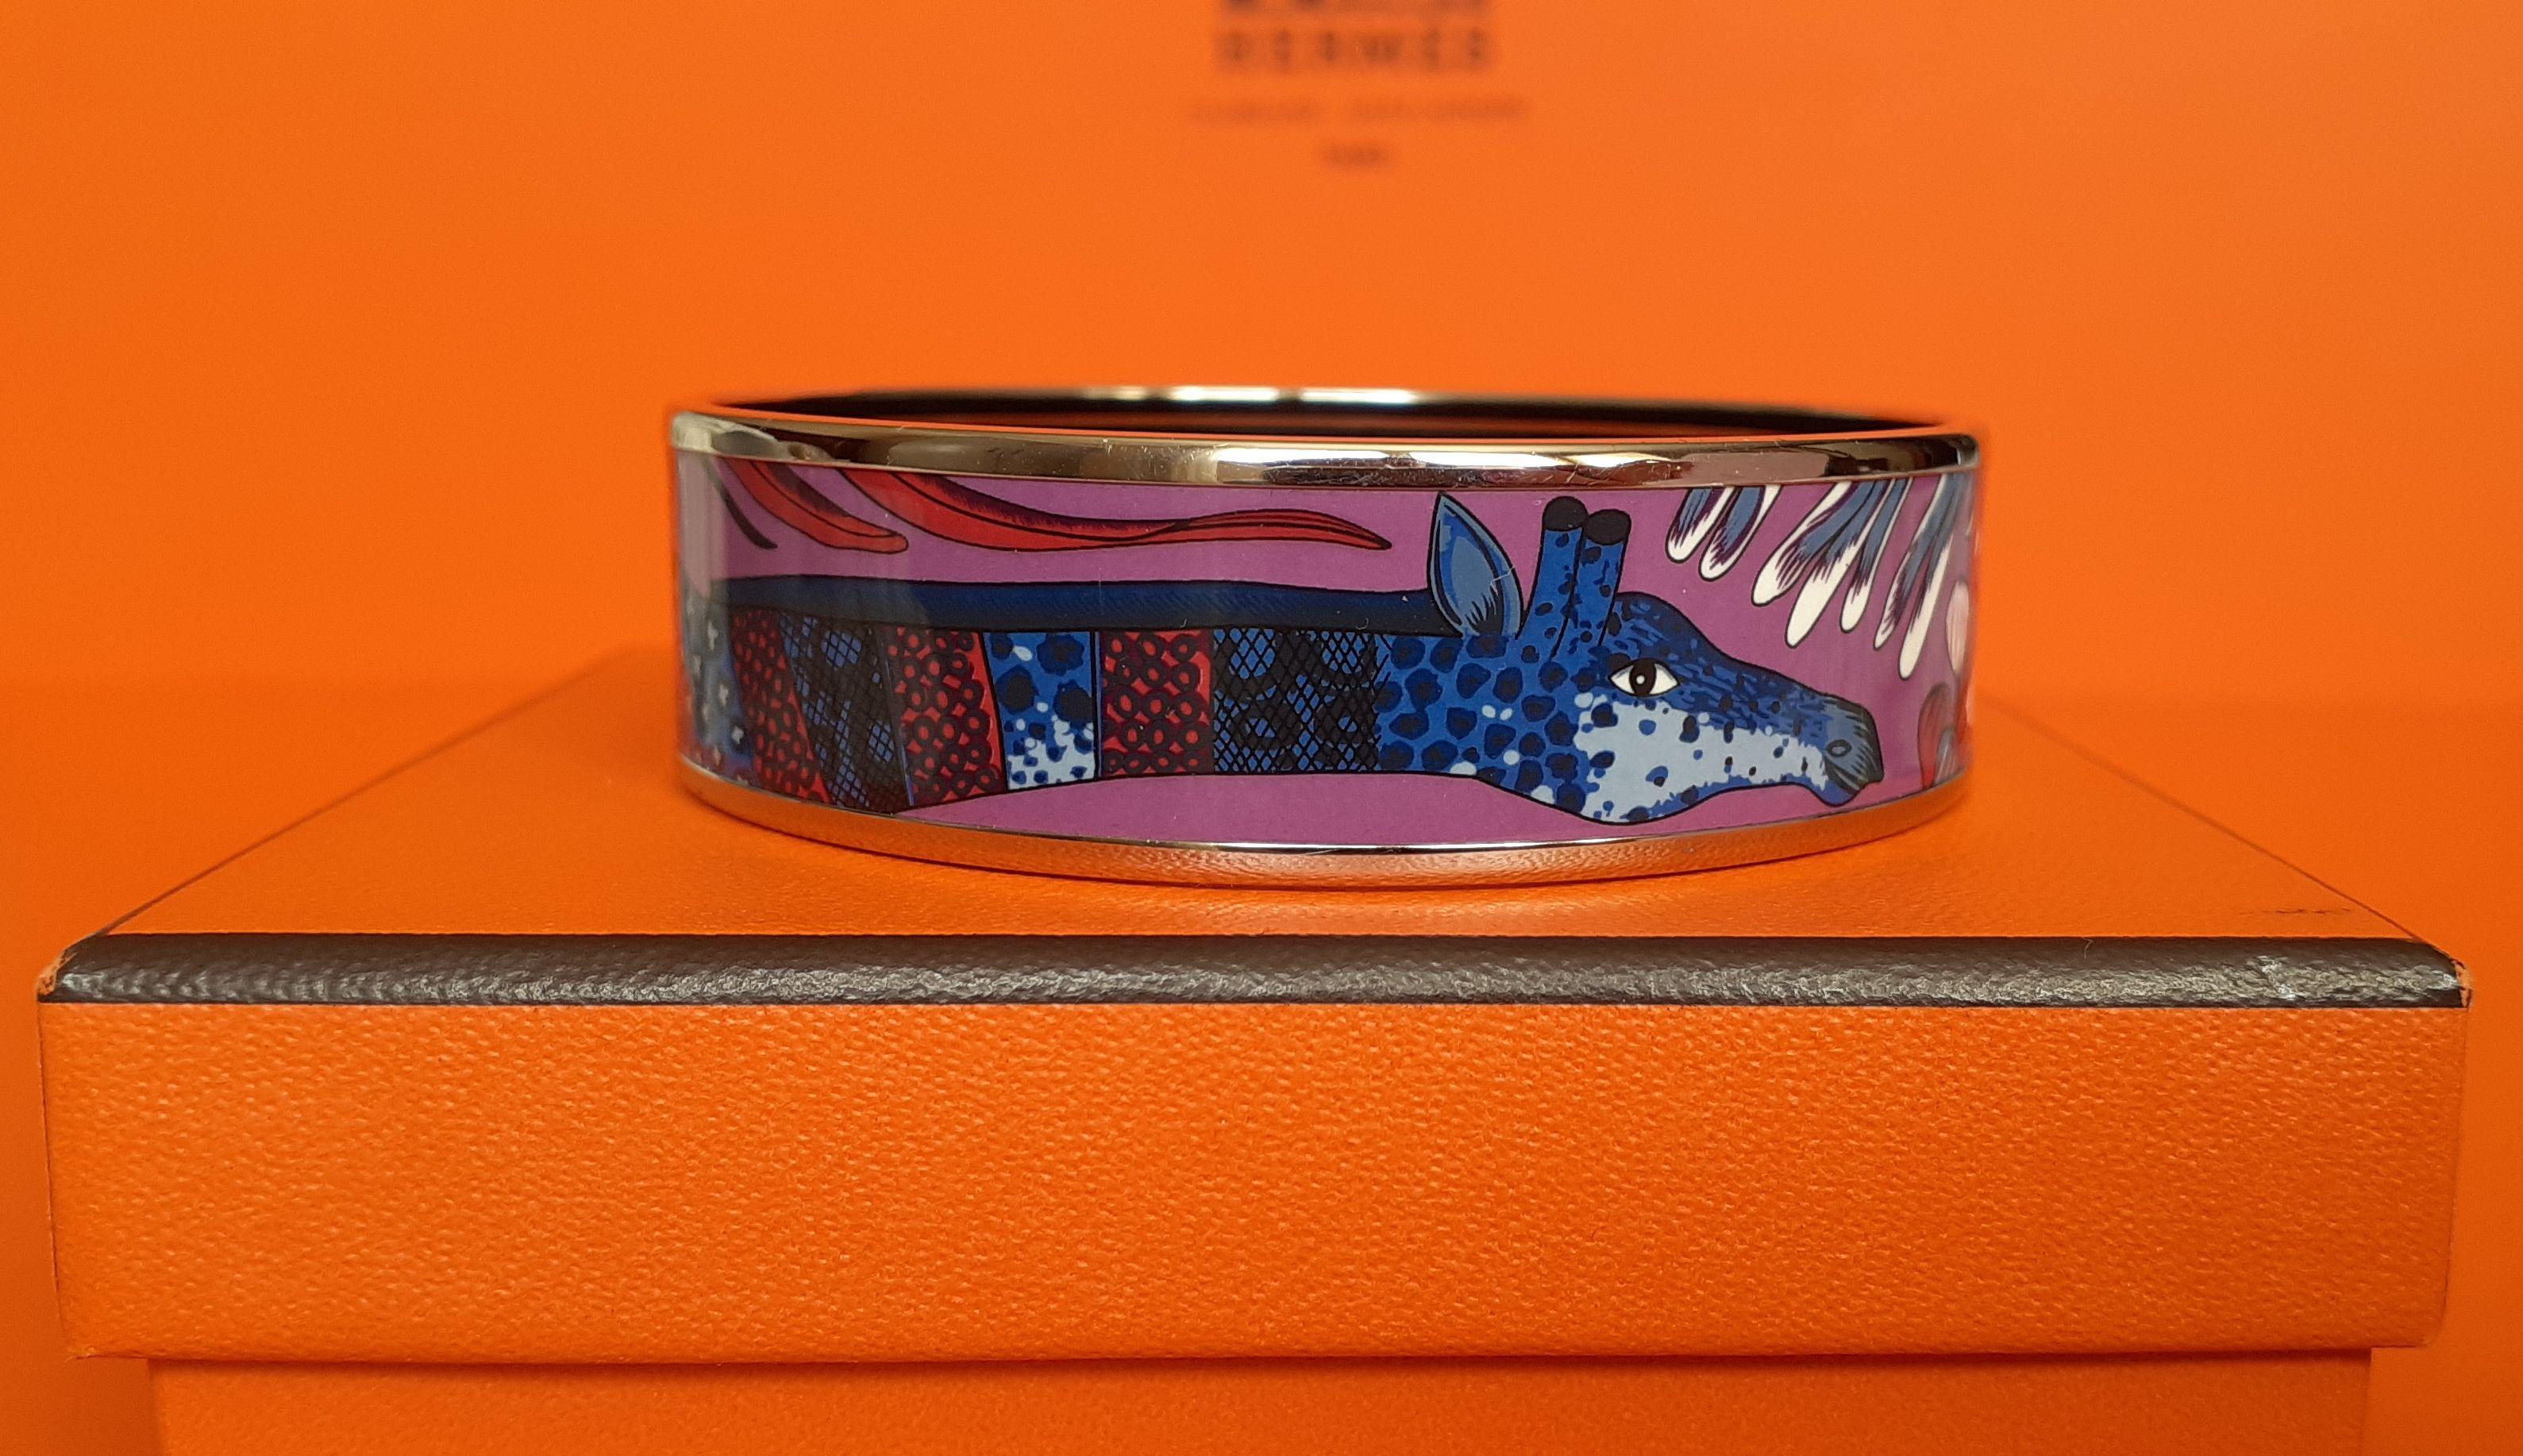 Gorgeous Authentic Hermès Bracelet

Print: a giraffe and flowers, patterns that we can find on the 